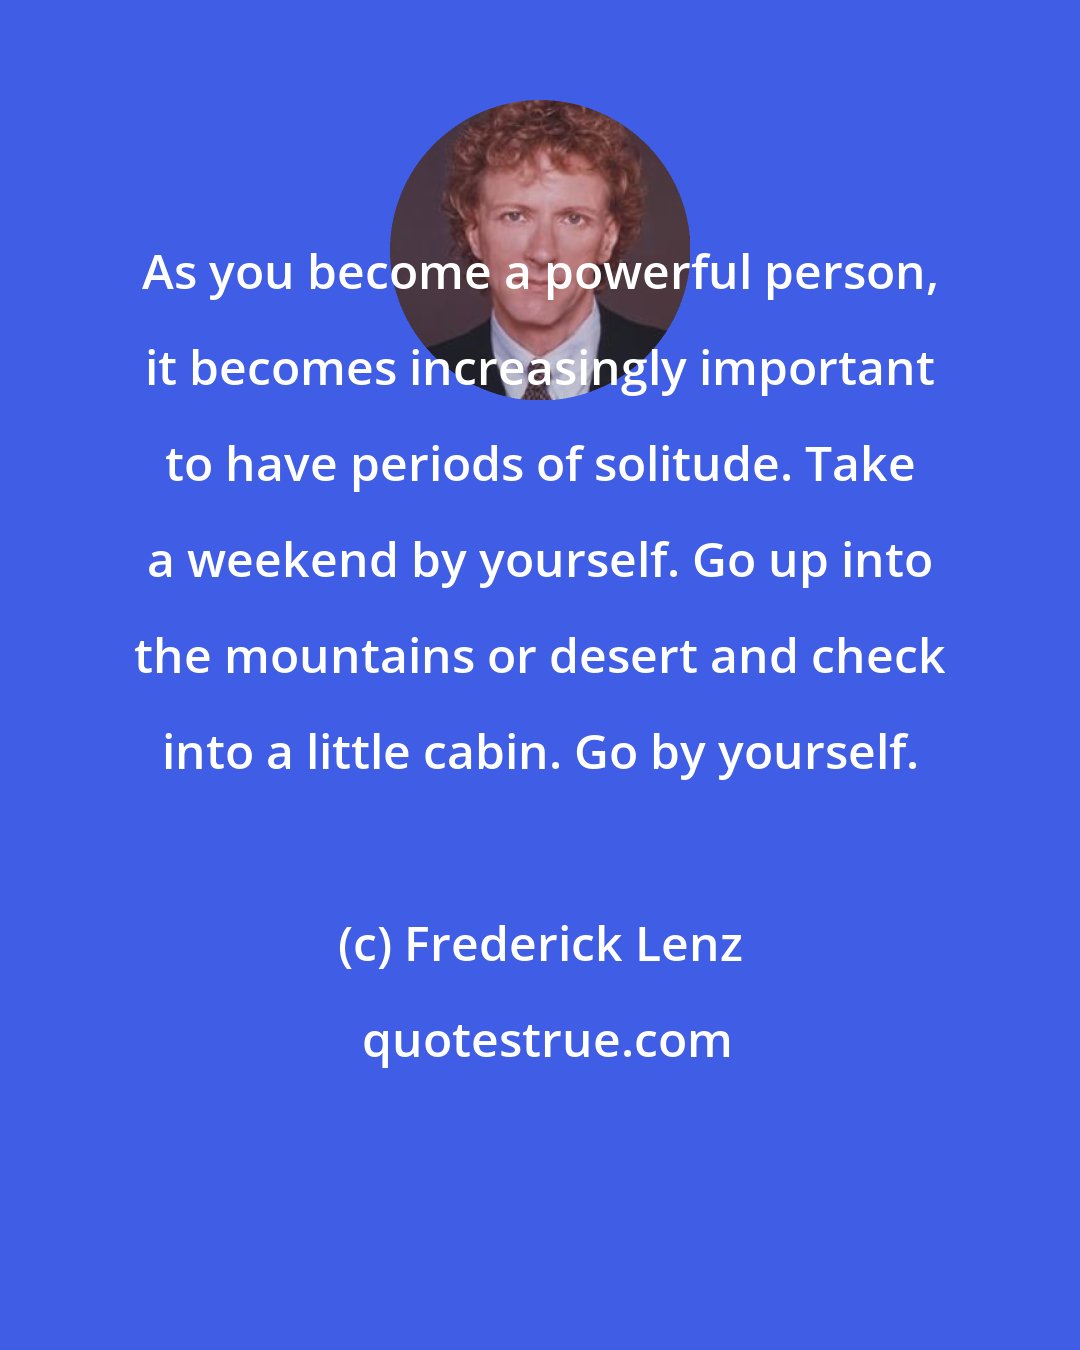 Frederick Lenz: As you become a powerful person, it becomes increasingly important to have periods of solitude. Take a weekend by yourself. Go up into the mountains or desert and check into a little cabin. Go by yourself.